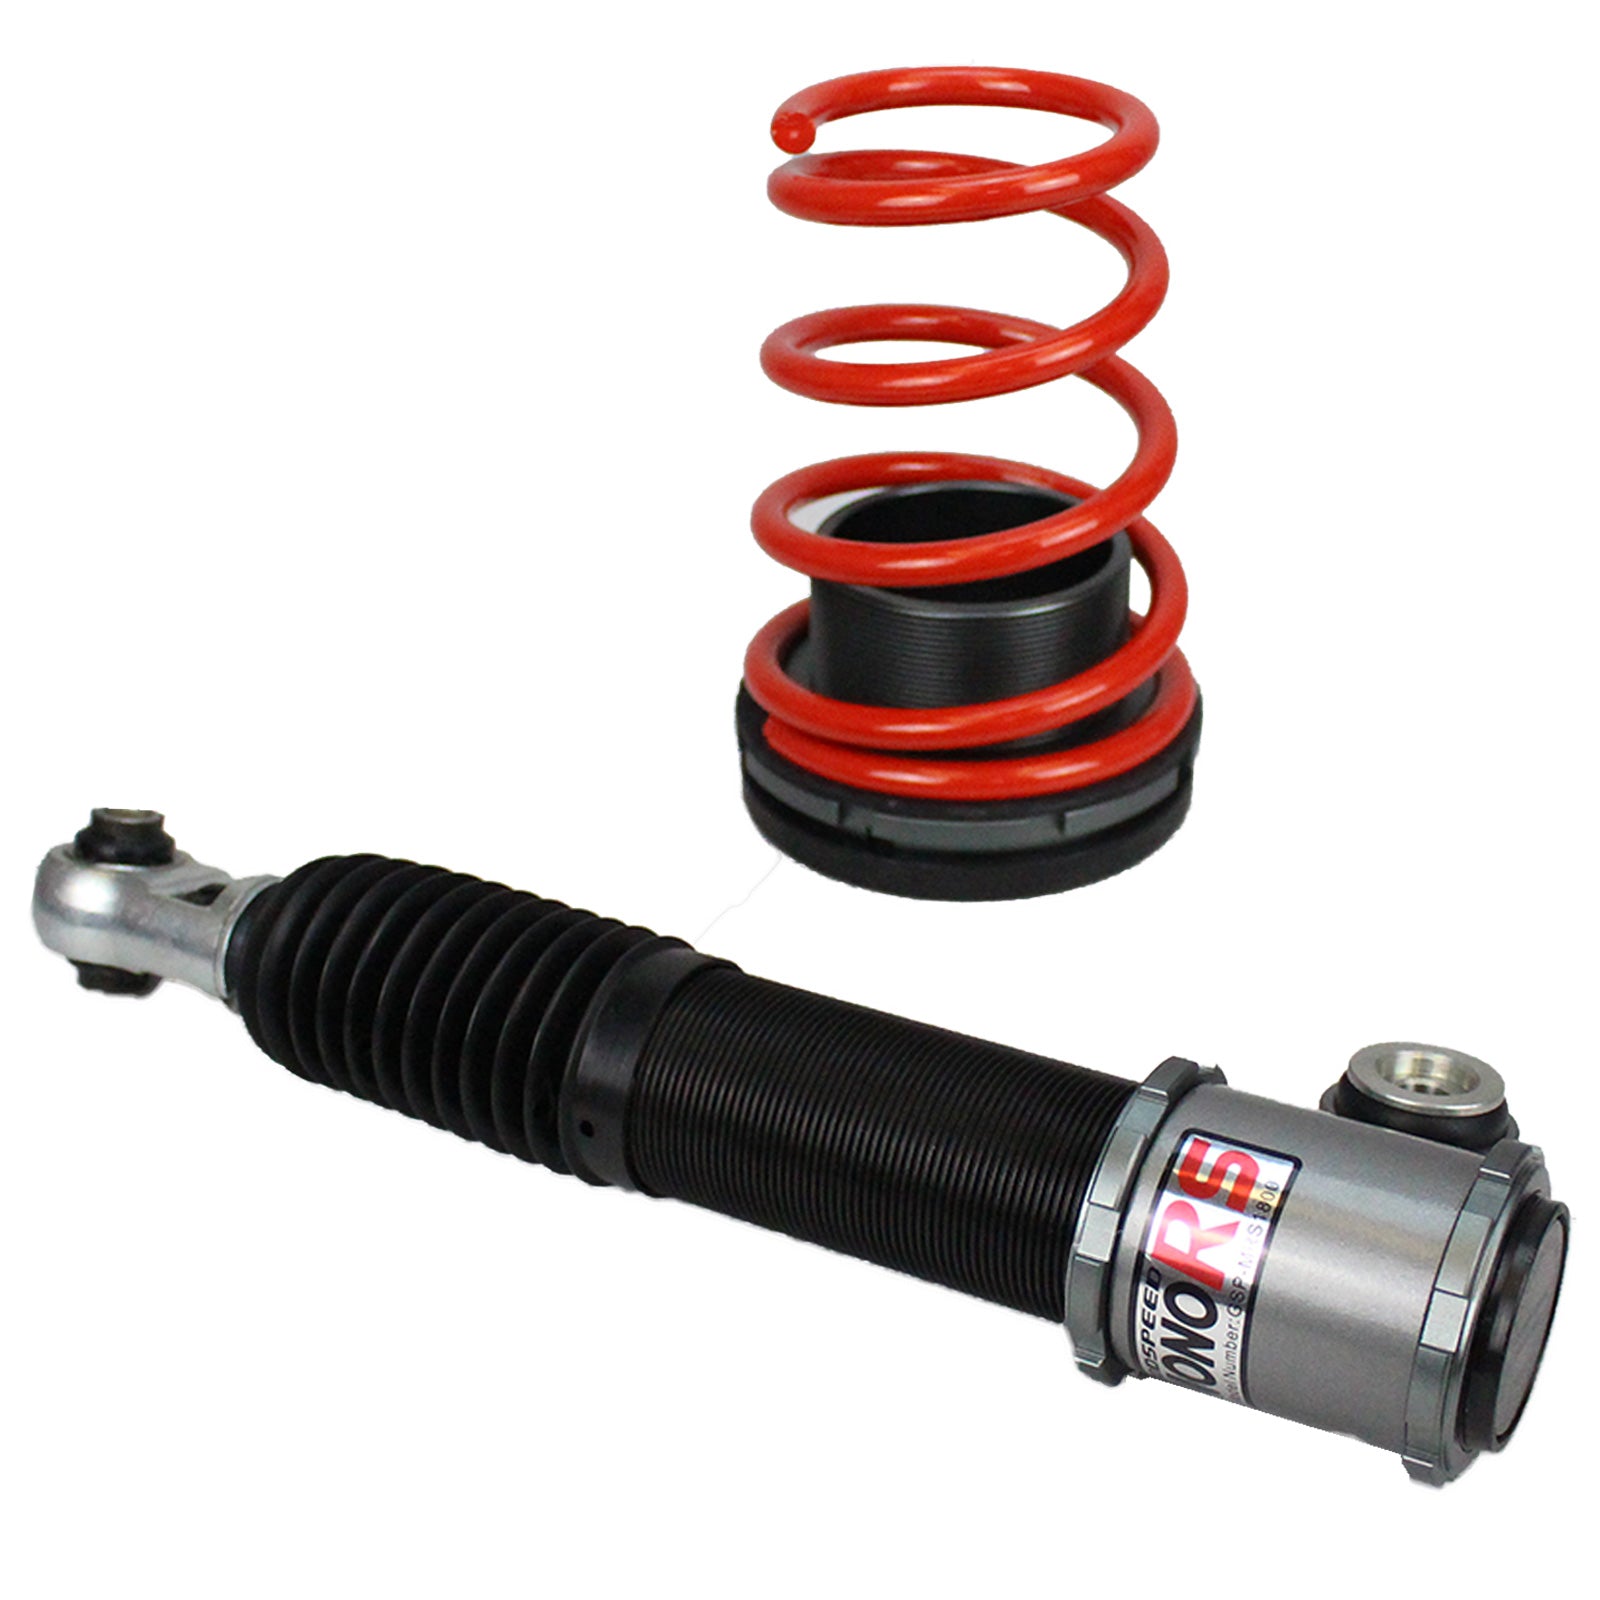 Godspeed MRS1800-D MonoRS Coilover Lowering Kit, 32 Damping Adjustment, Ride Height Adjustable